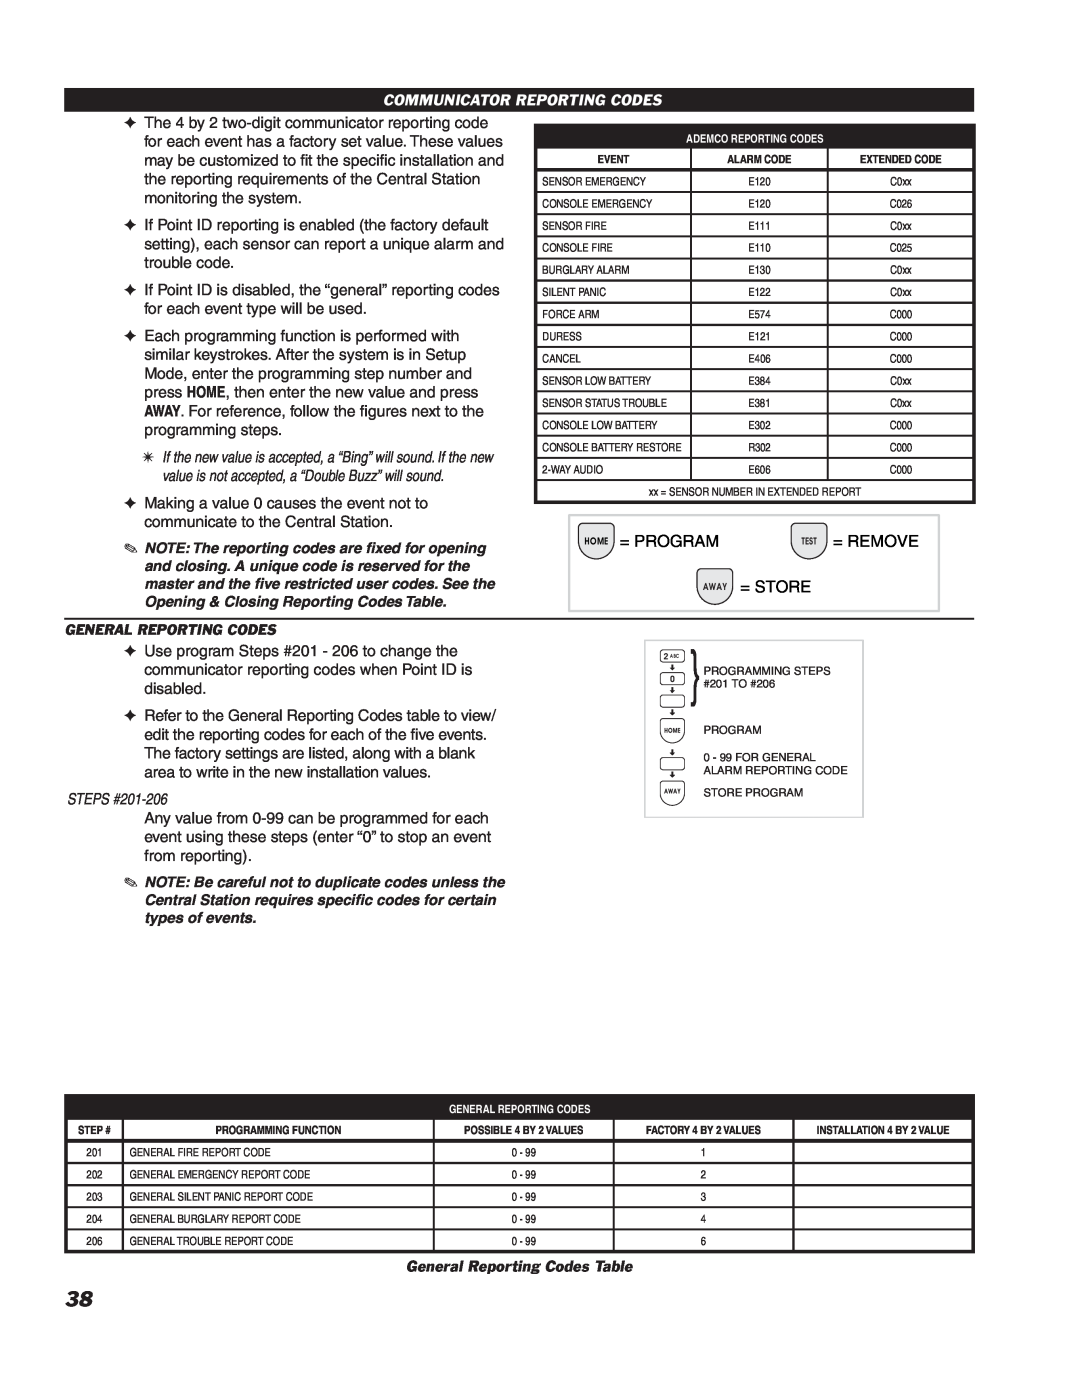 Linear DVS-2400 manual Communicator Reporting Codes, STEPS #201-206, General Reporting Codes Table, Home = Program 